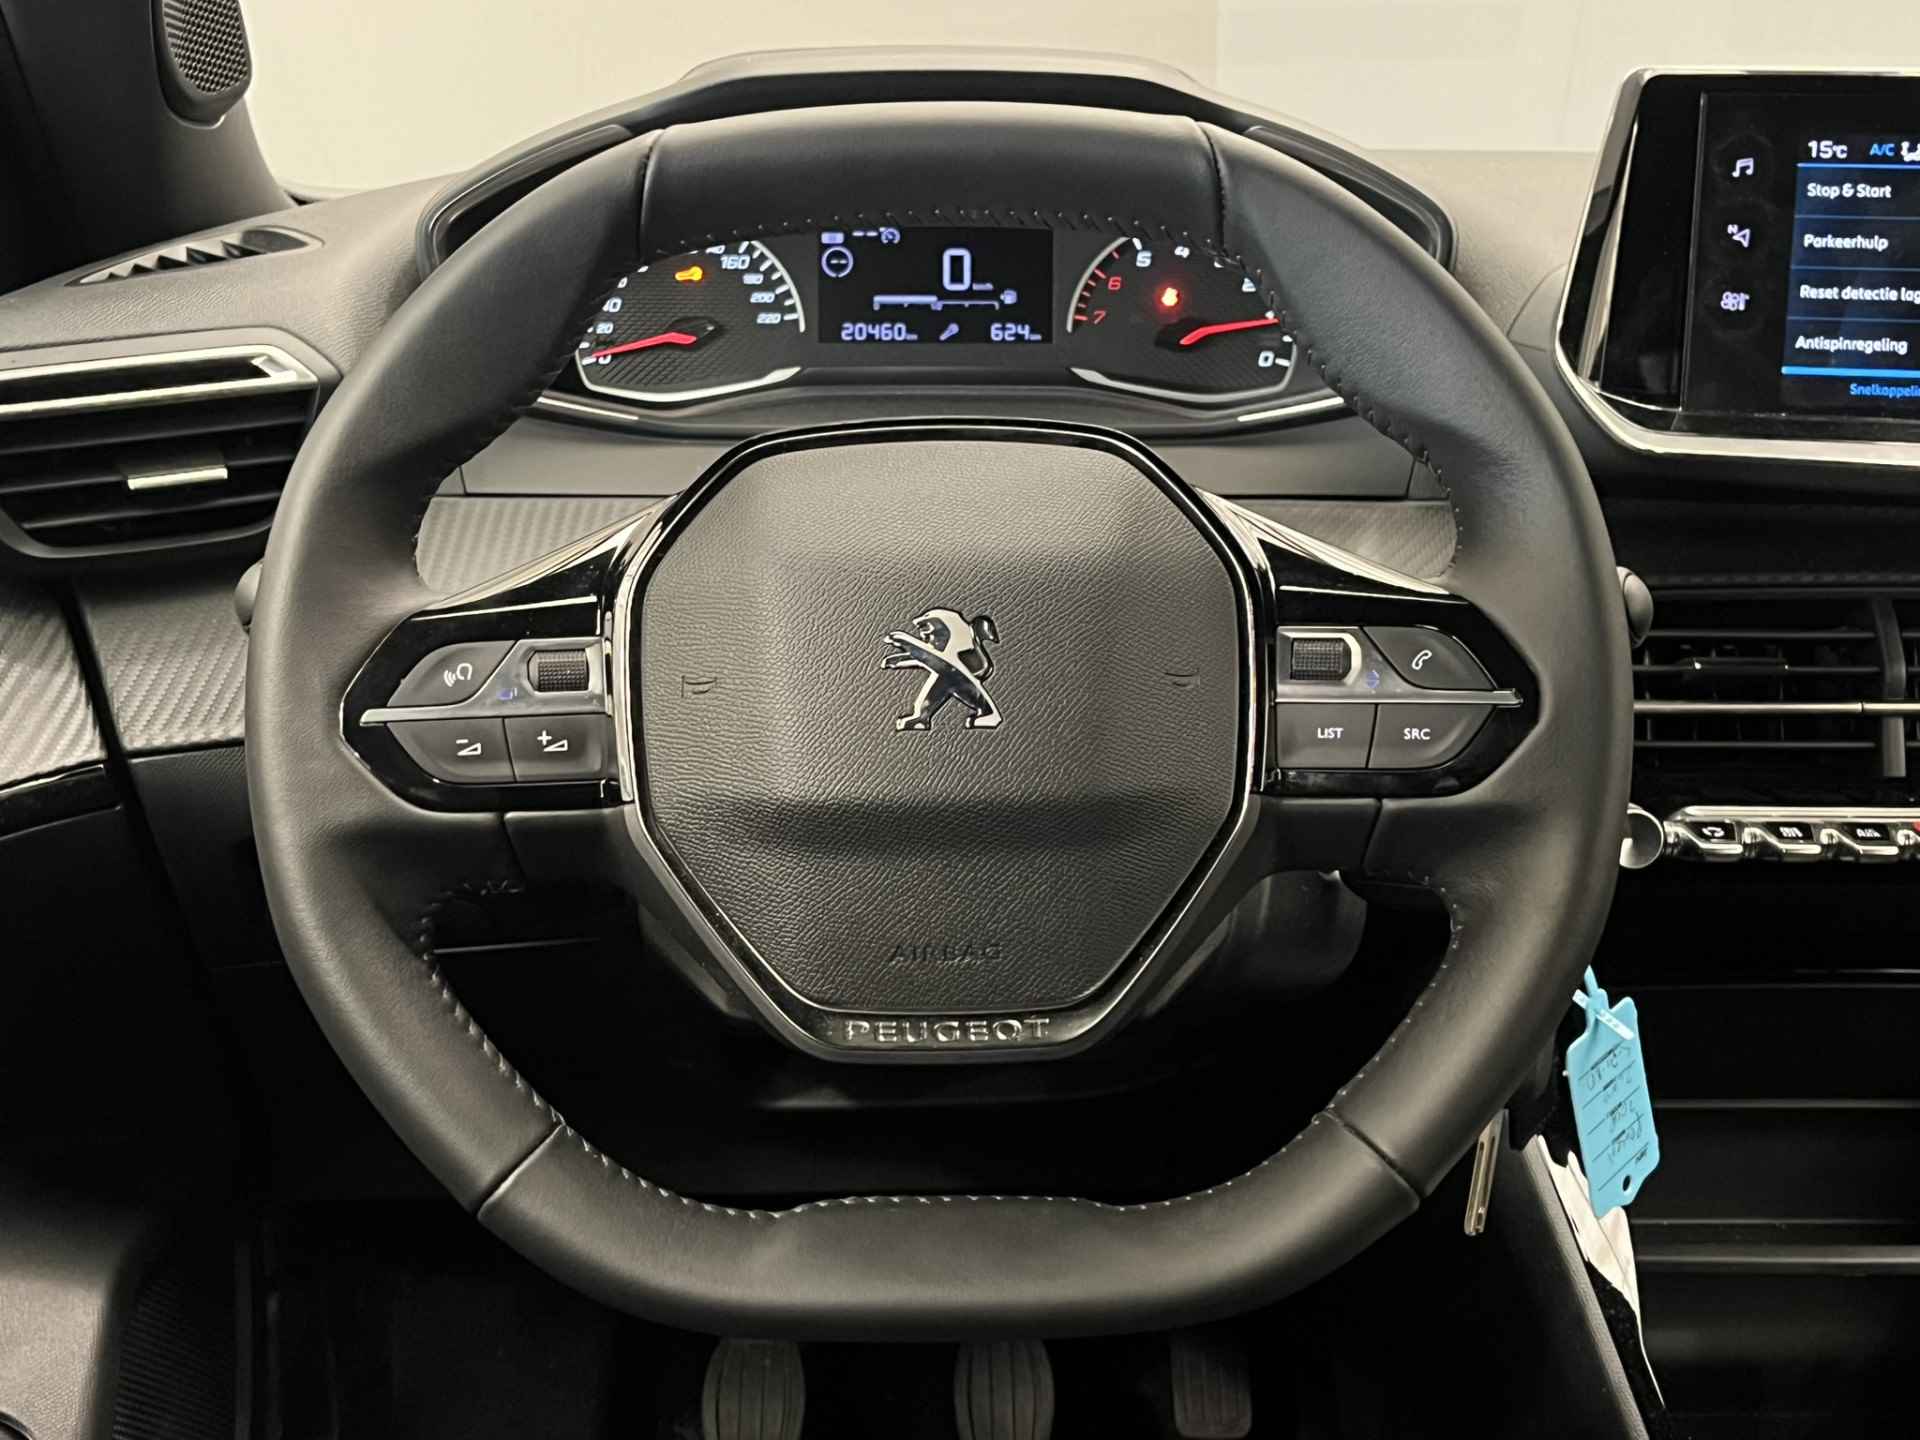 Peugeot 2008 1.2 100PK Active | Parkeersensoren Achter | Apple/Android Carplay | Airco | Cruise | LED | DAB | Bluetooth | Centrale Vergrendeling - 28/32